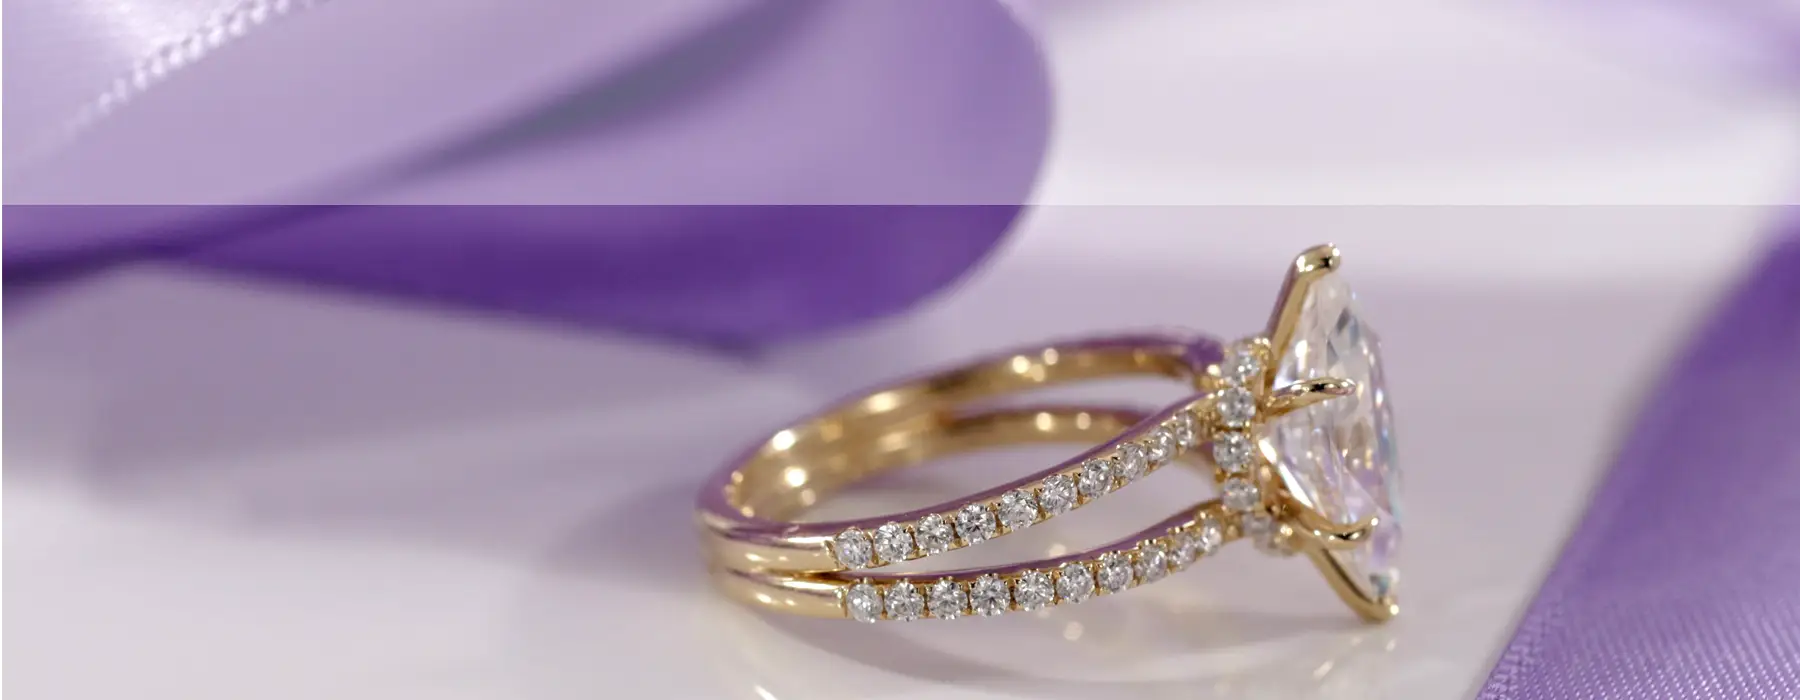 canadian moissanite rings and wedding bands made affordable